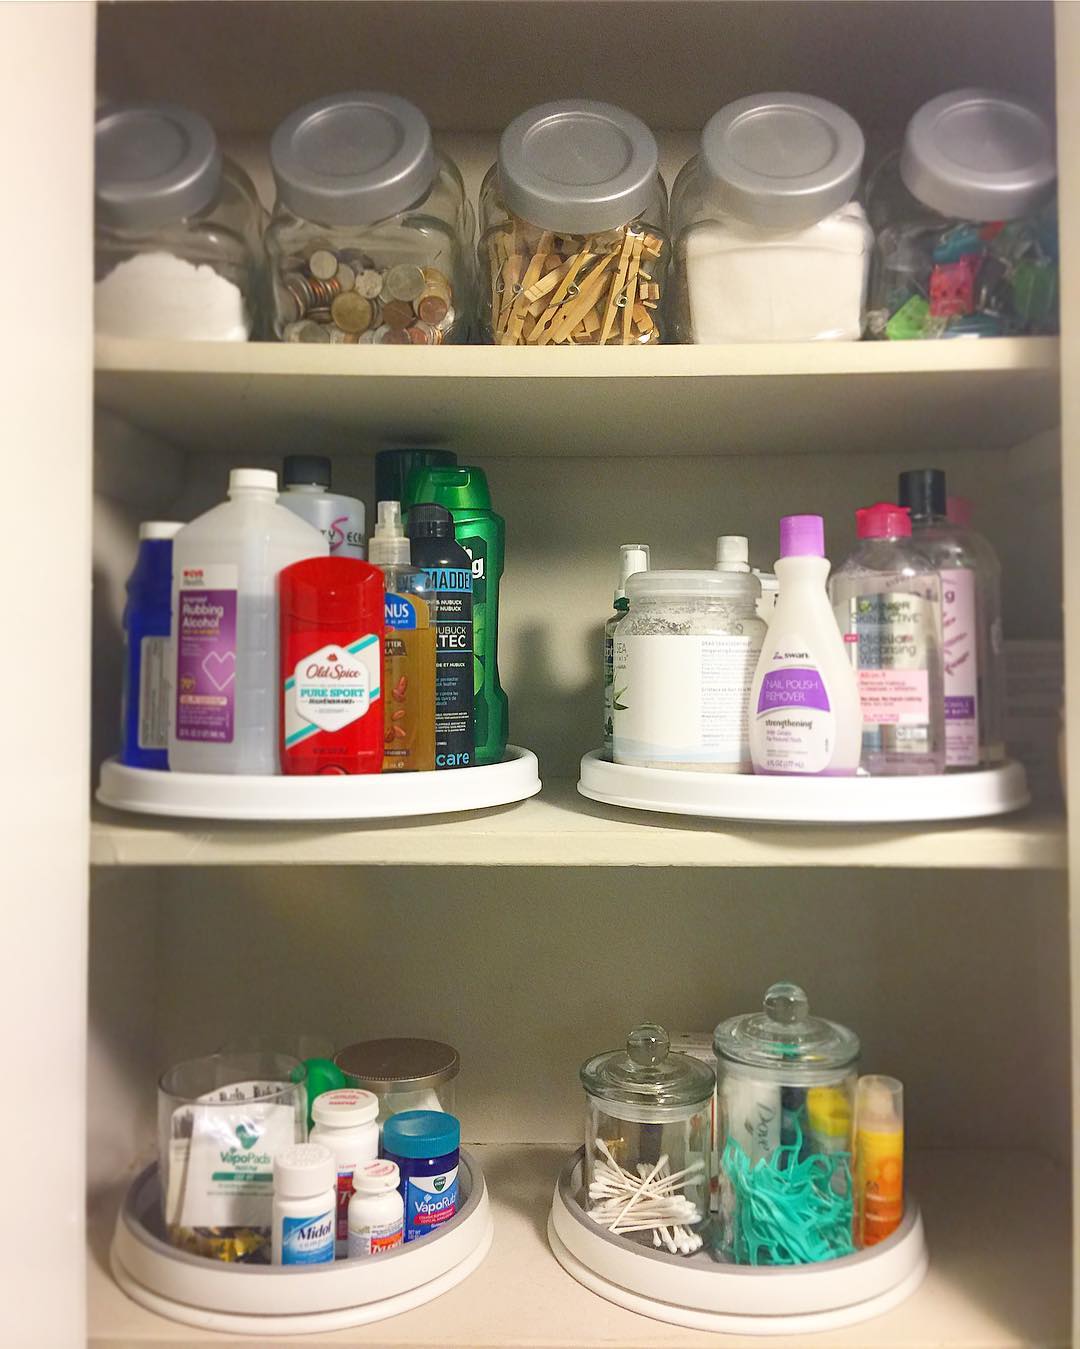 Lazy Susan with Beauty Products in Closet. Photo by Instagram user @visionnoclutter